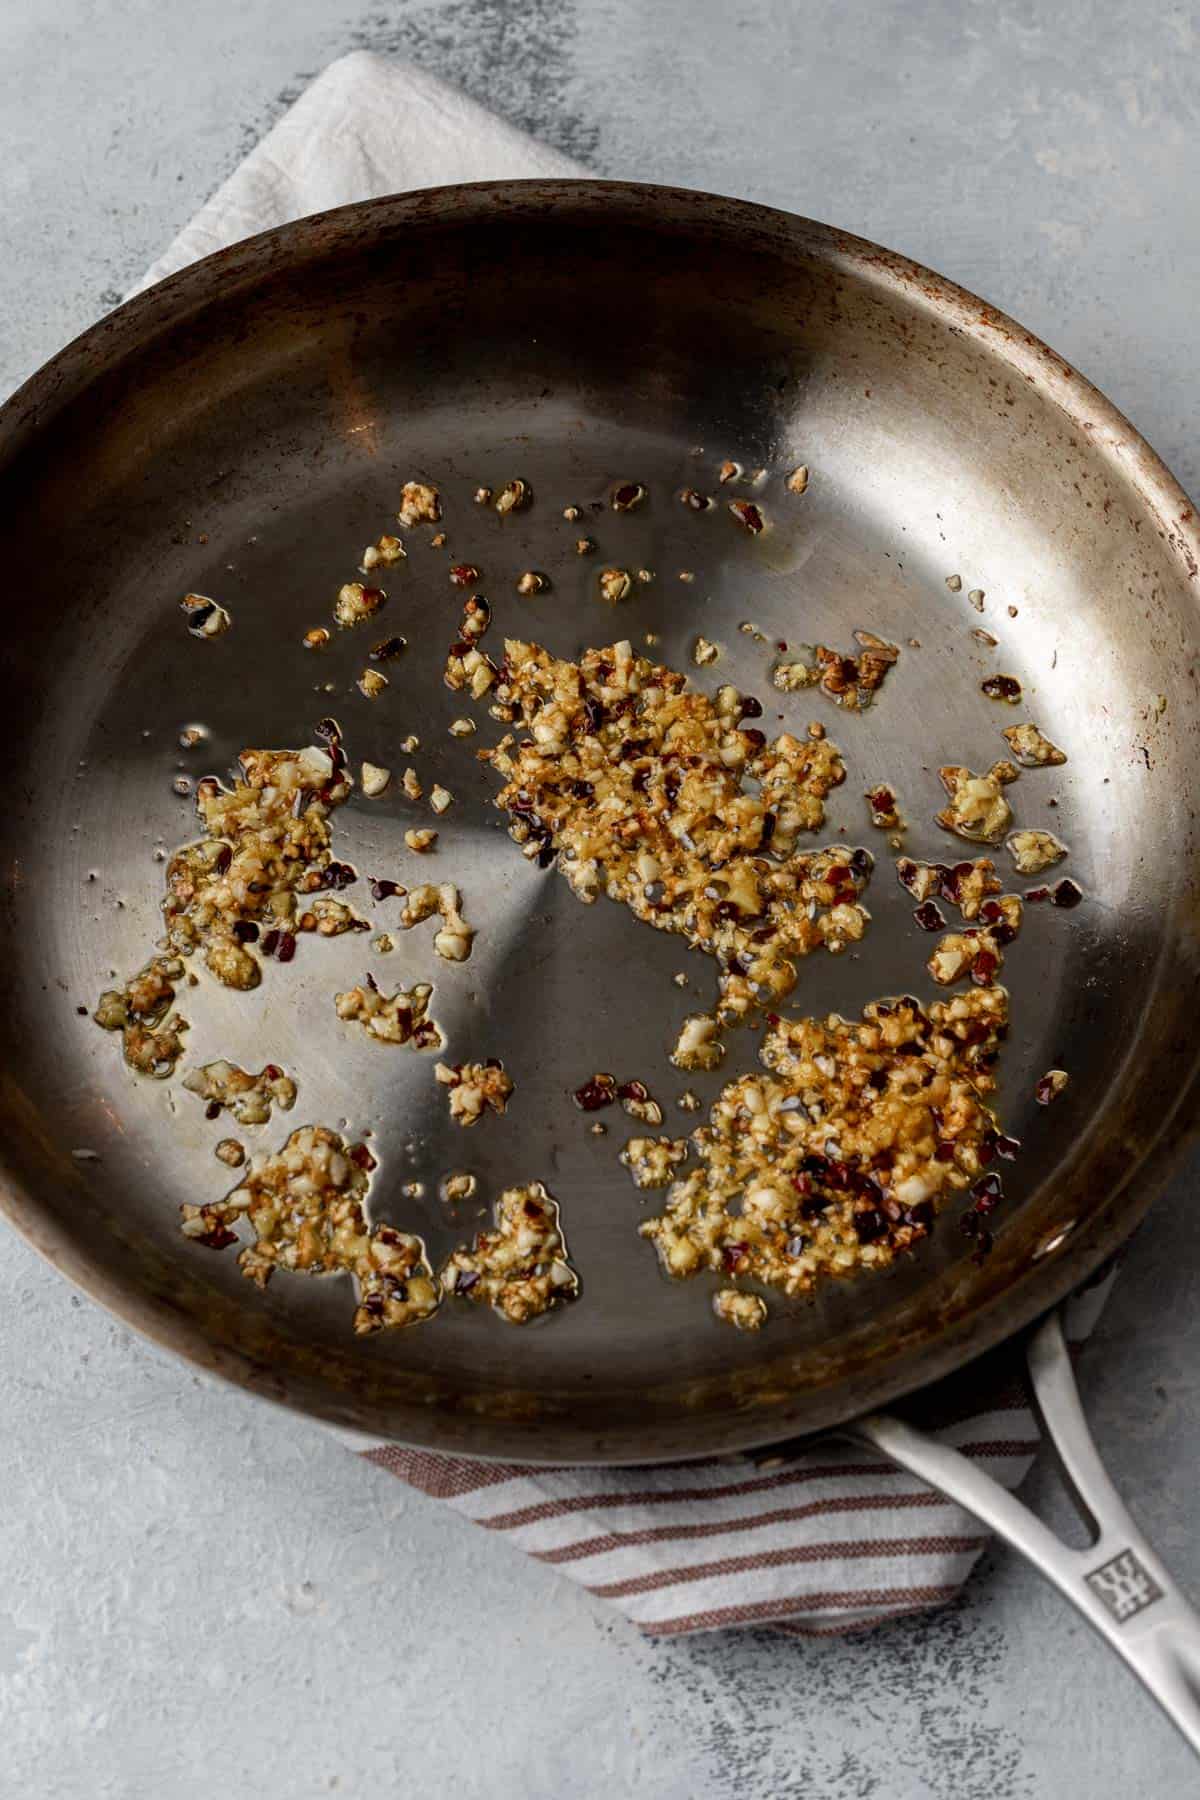 Toasted garlic, ginger, and chili flakes in a skillet.